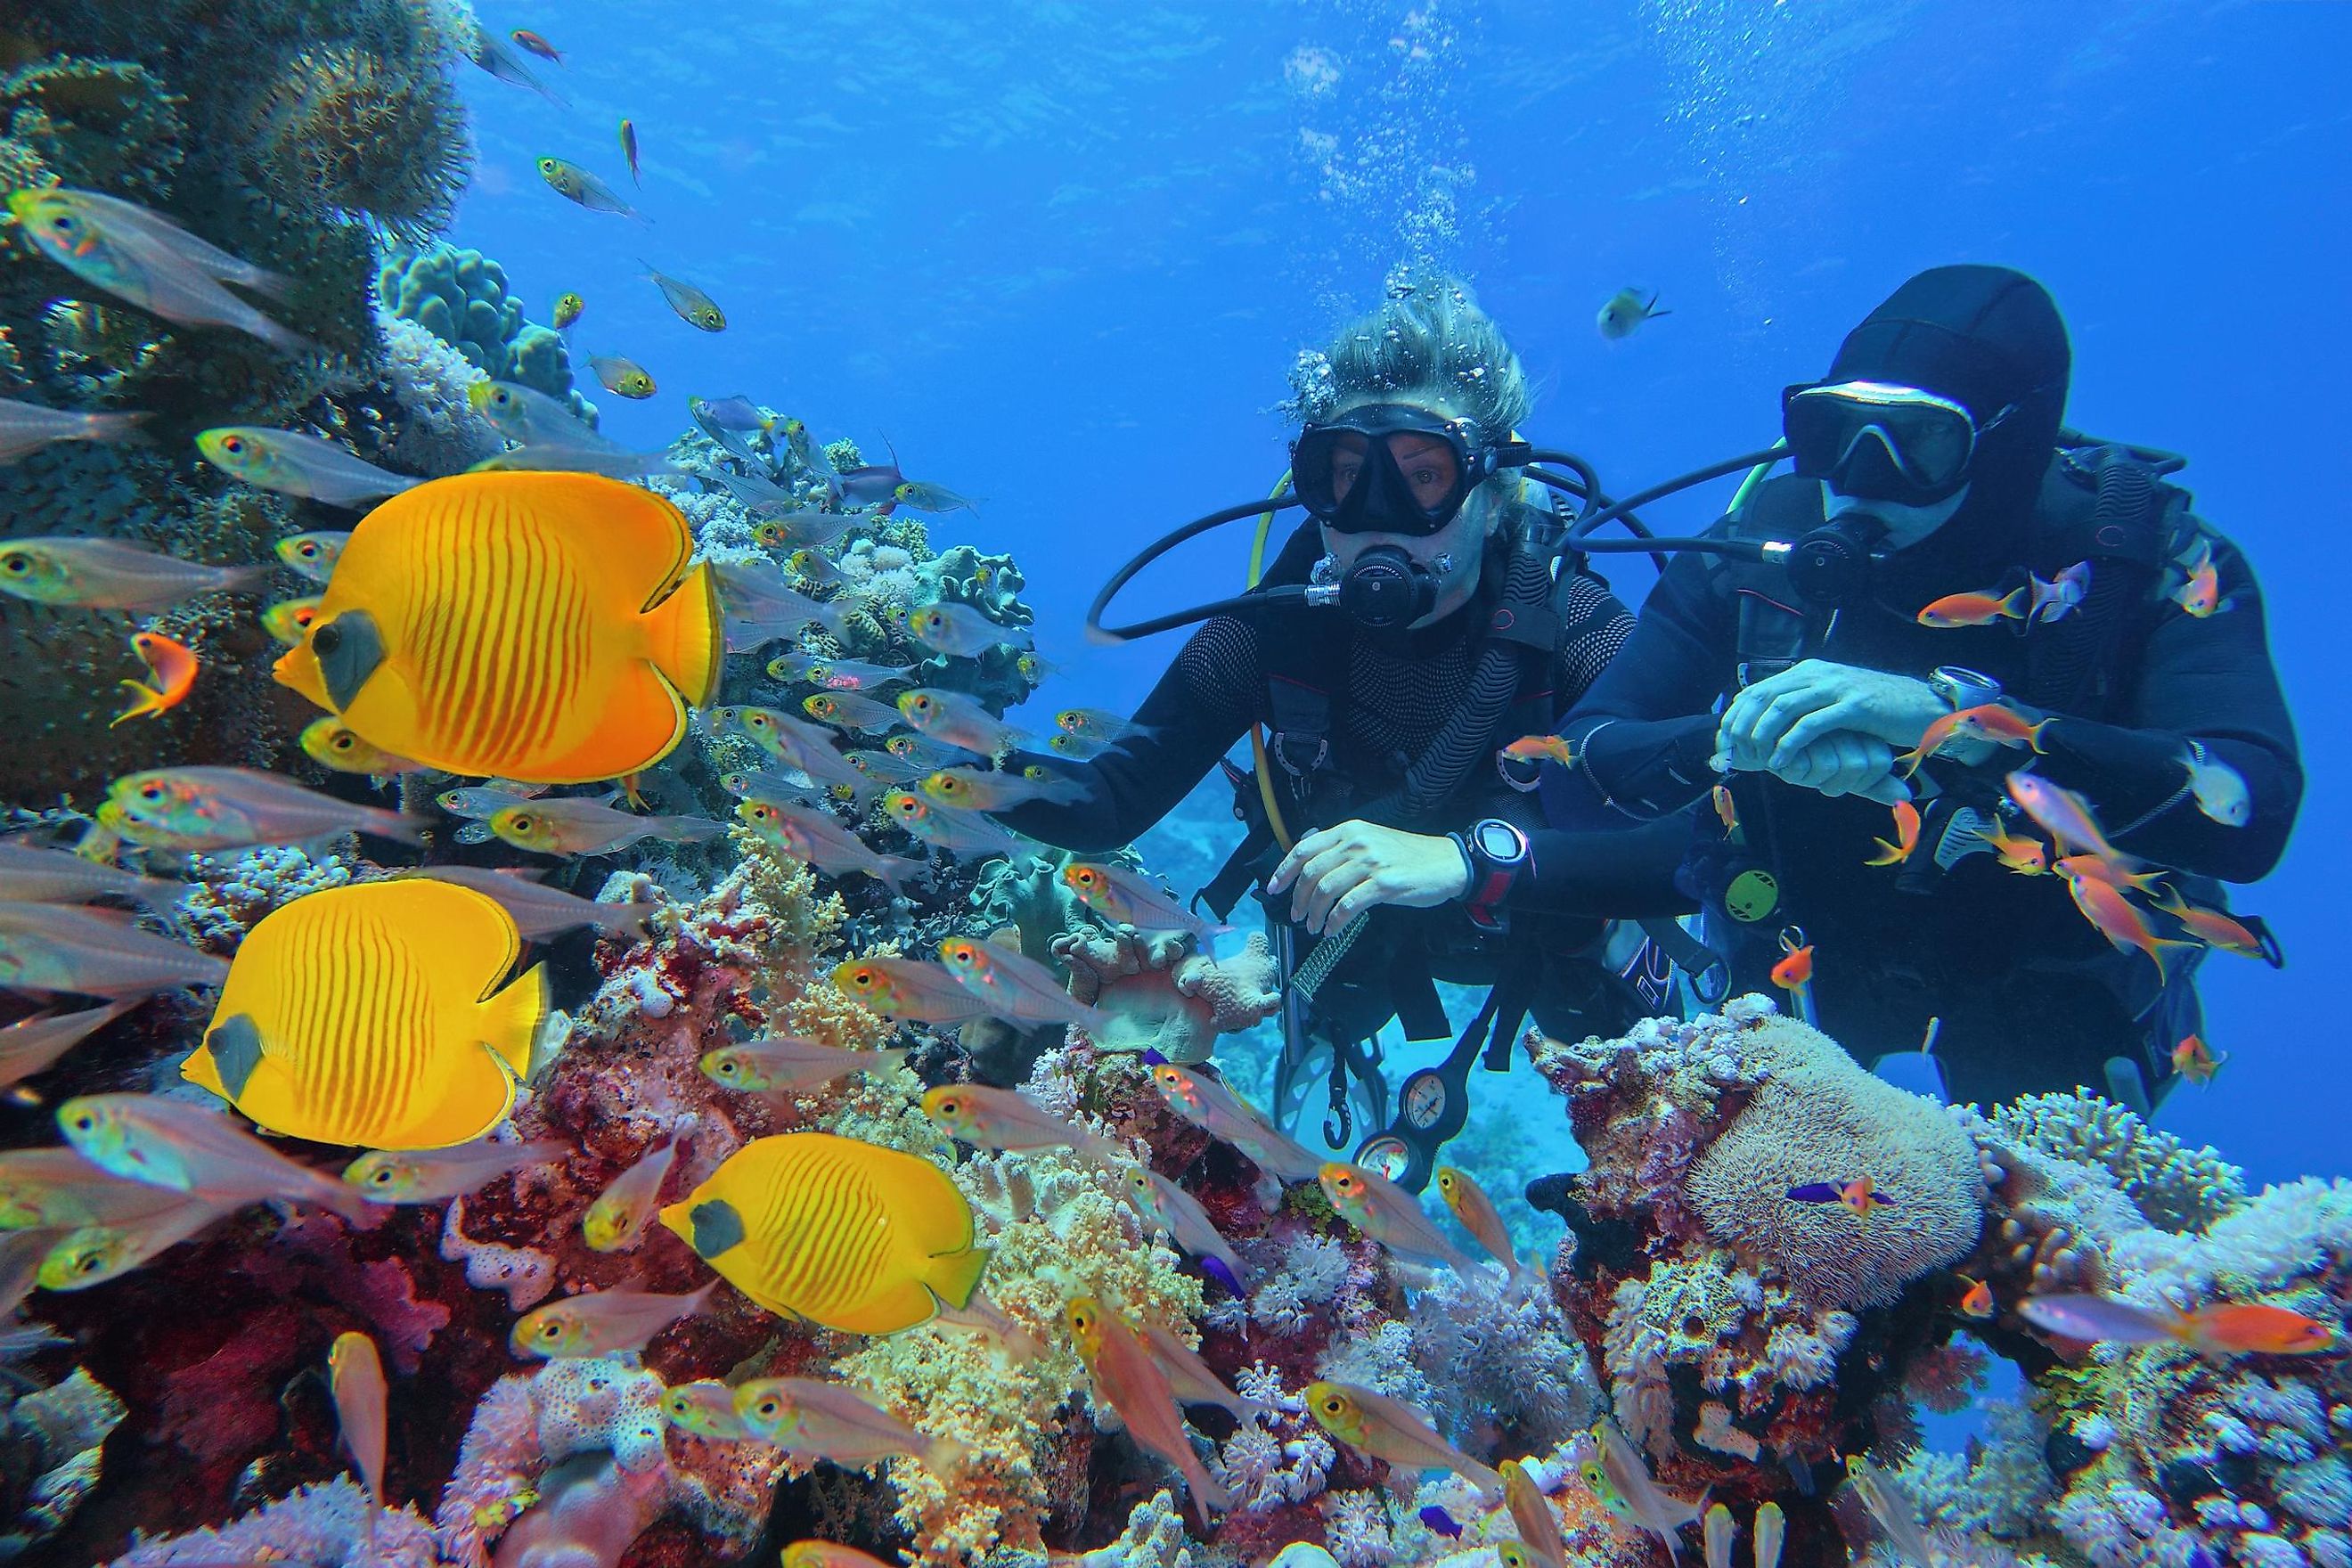 Divers exploring the rich marine life of a coral reef in the Red Sea.